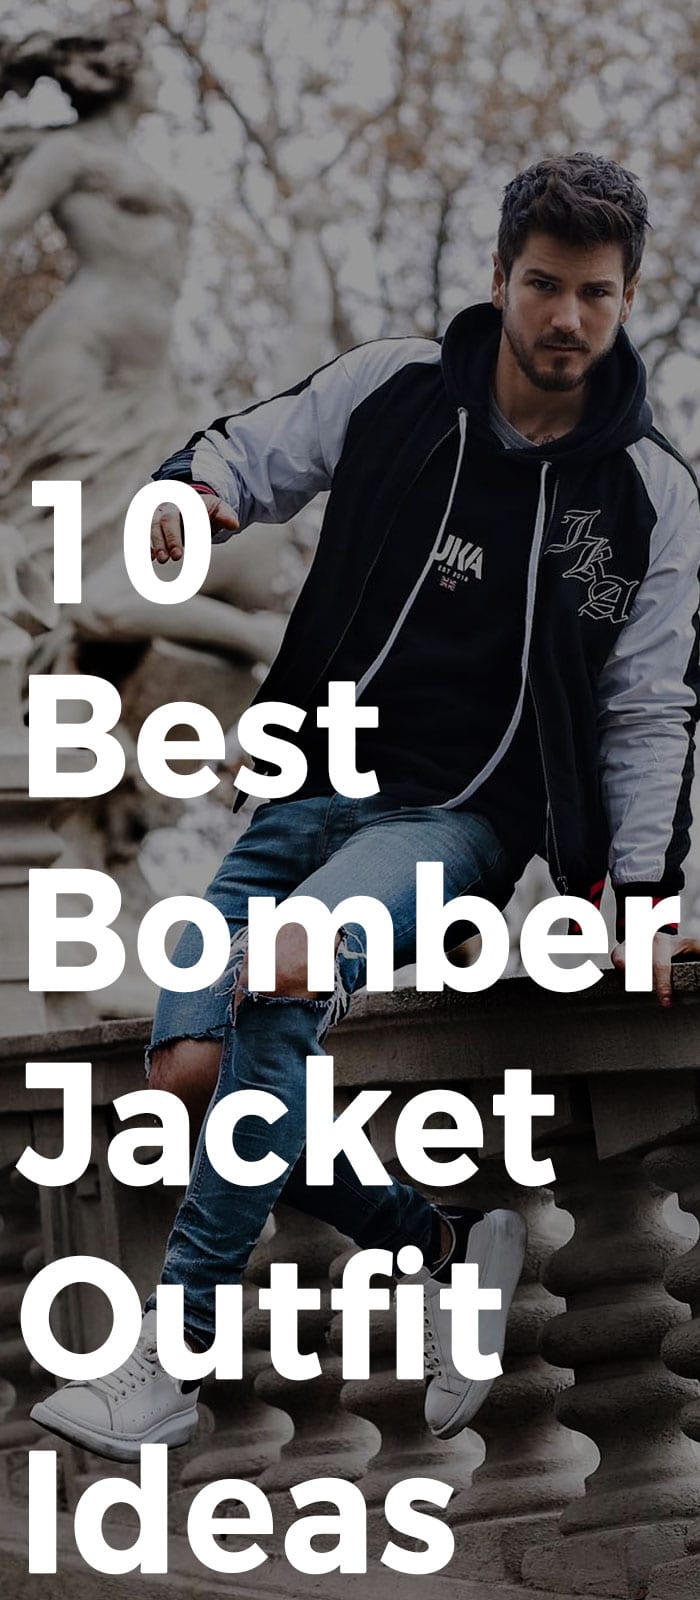 10 Best Bomber Jacket Outfit Ideas.